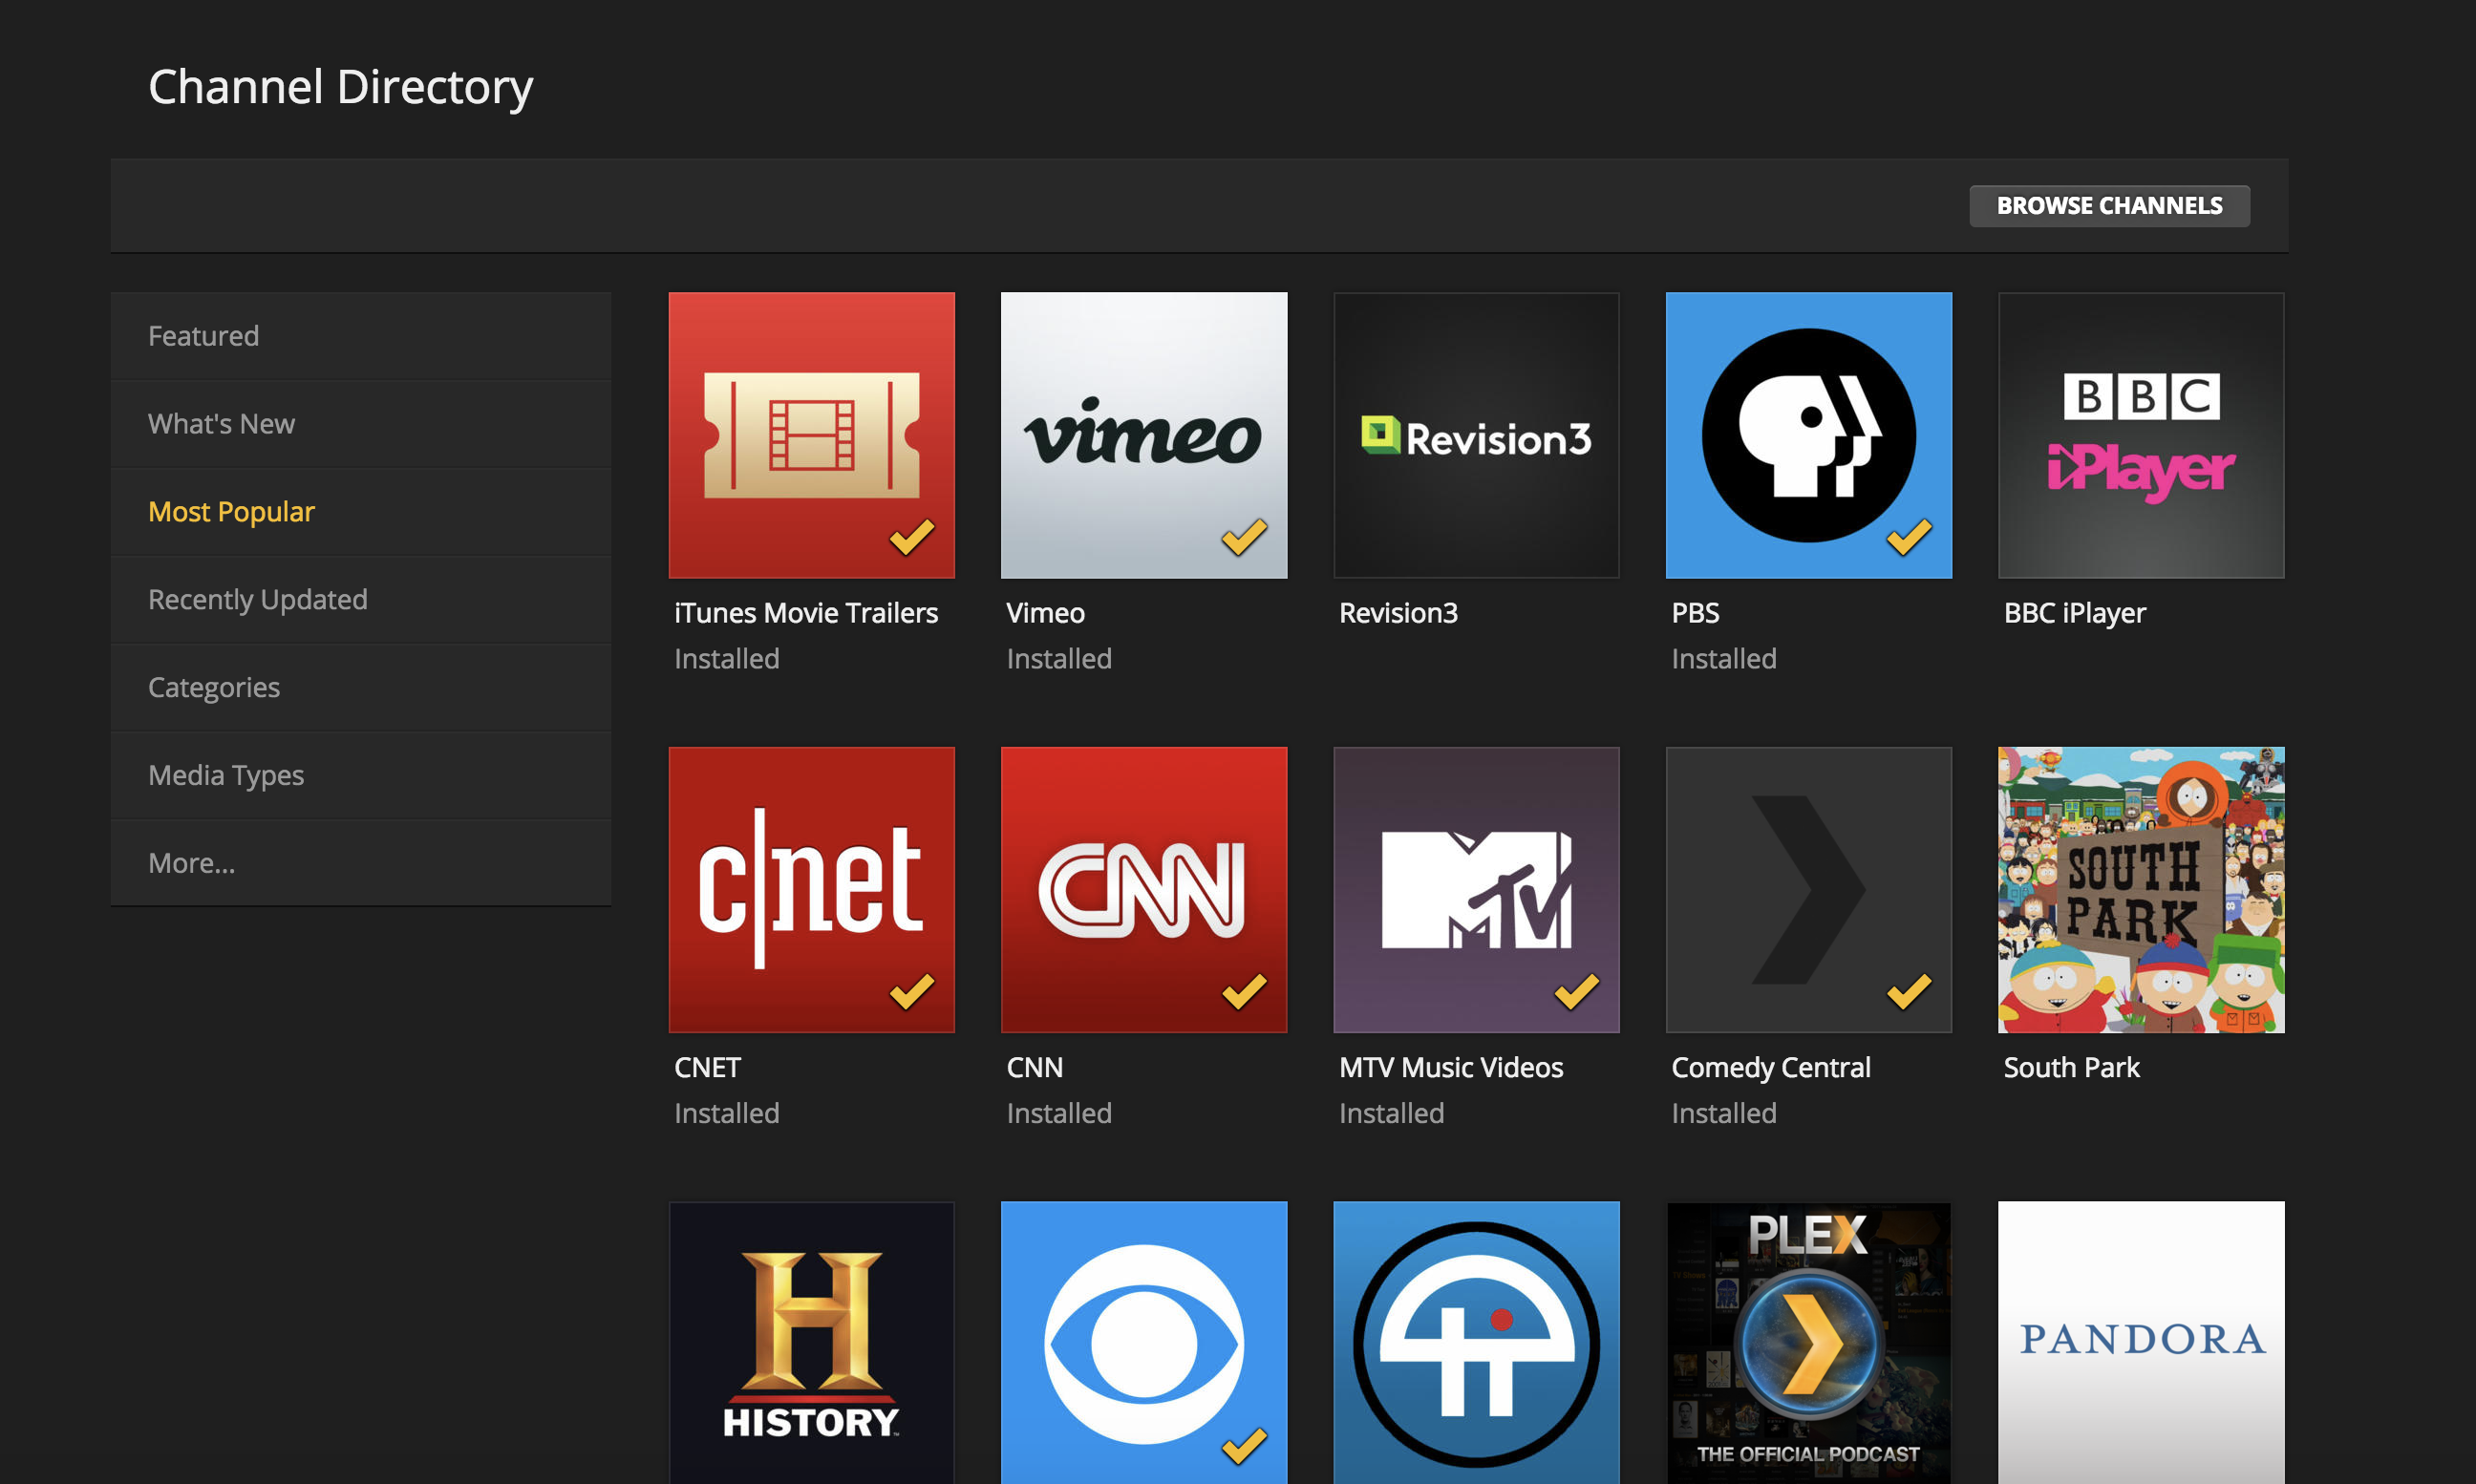 Featured channels. Plex (Company).